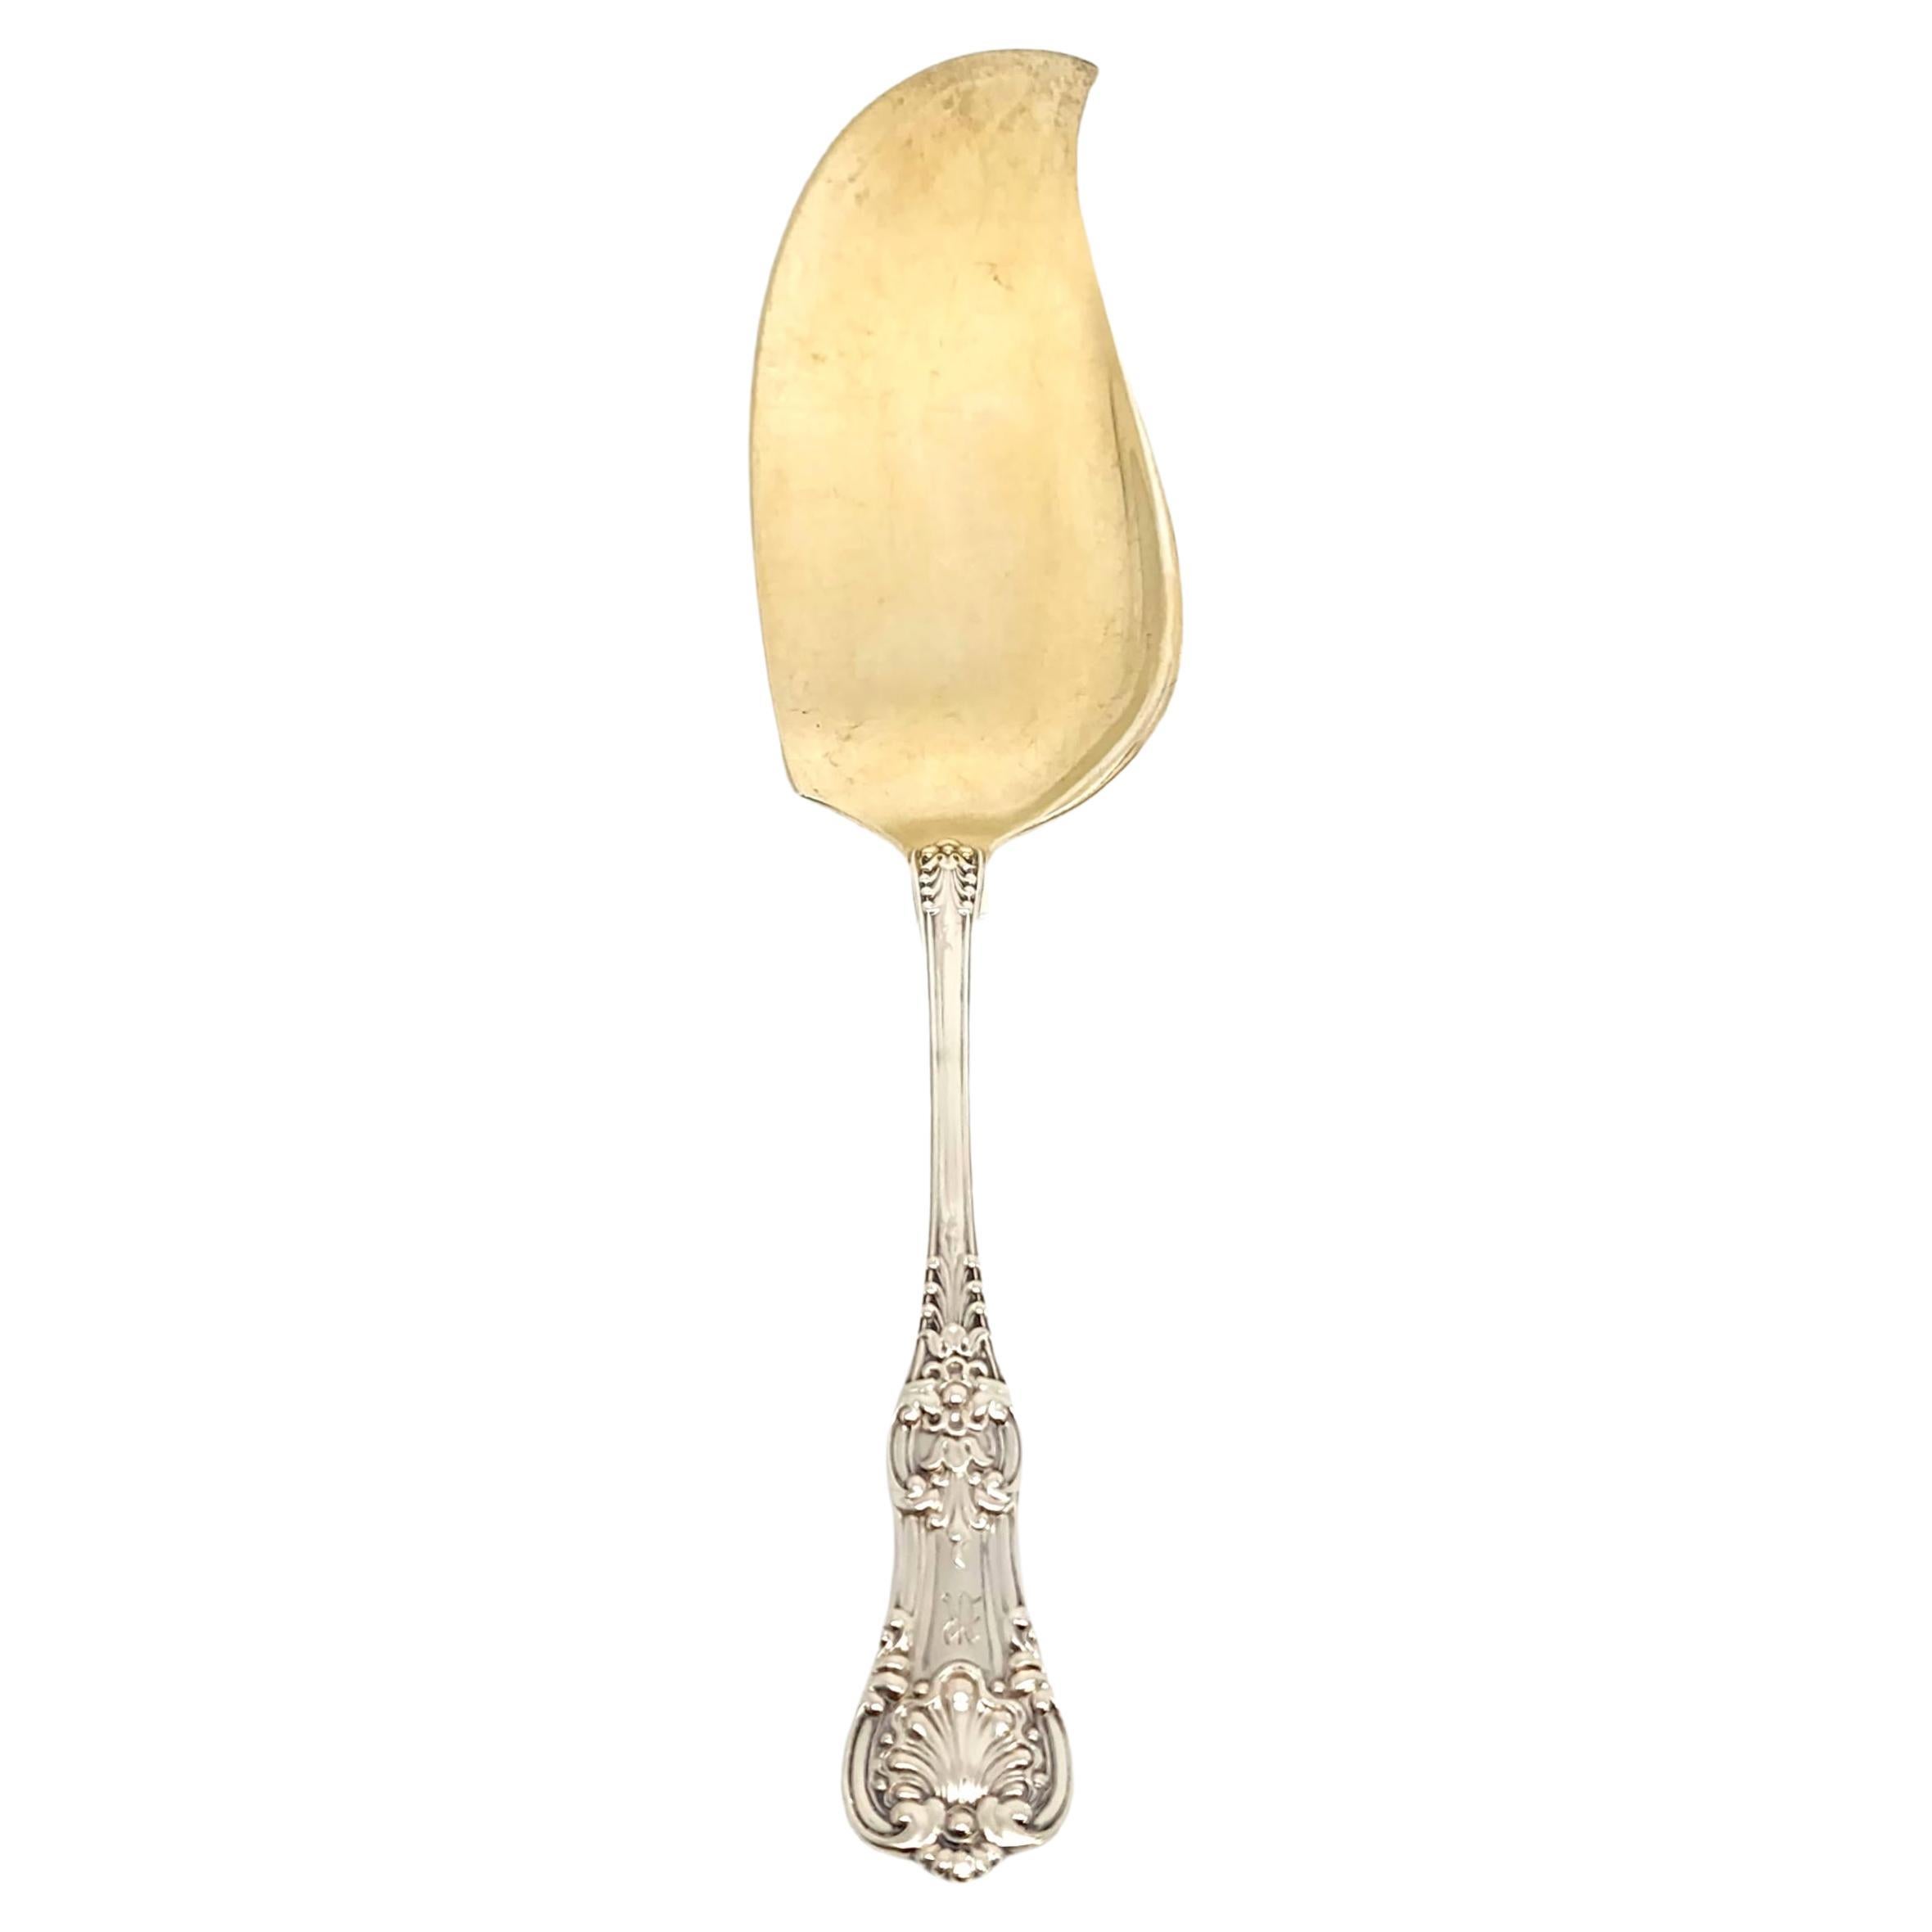 Tiffany & Co English King 1885 Sterling Silver Gold Wash Blade Ice Cream Server For Sale